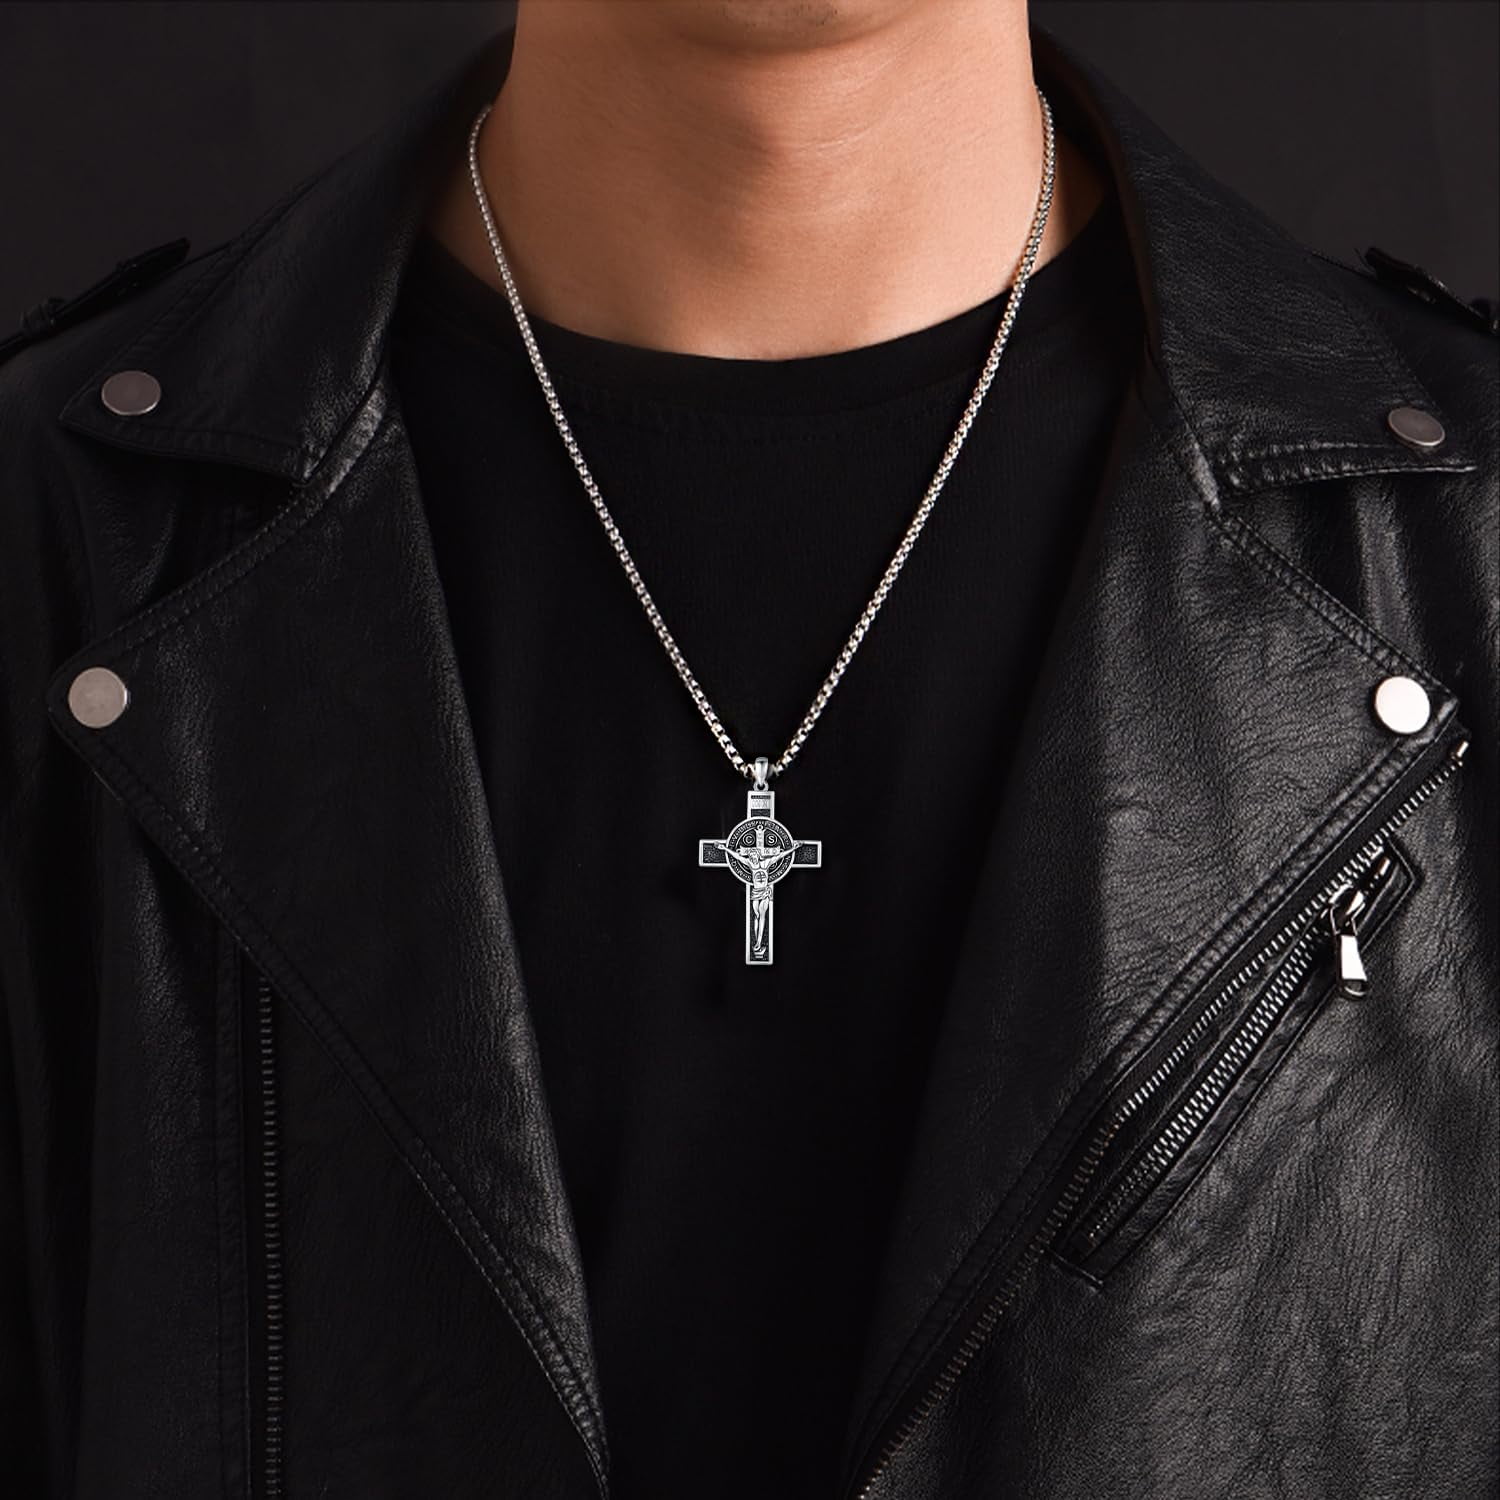 Real 925 Silver / Gold Plated Four 4 Way Catholic Cross Pendant Men's  Miraculous | eBay